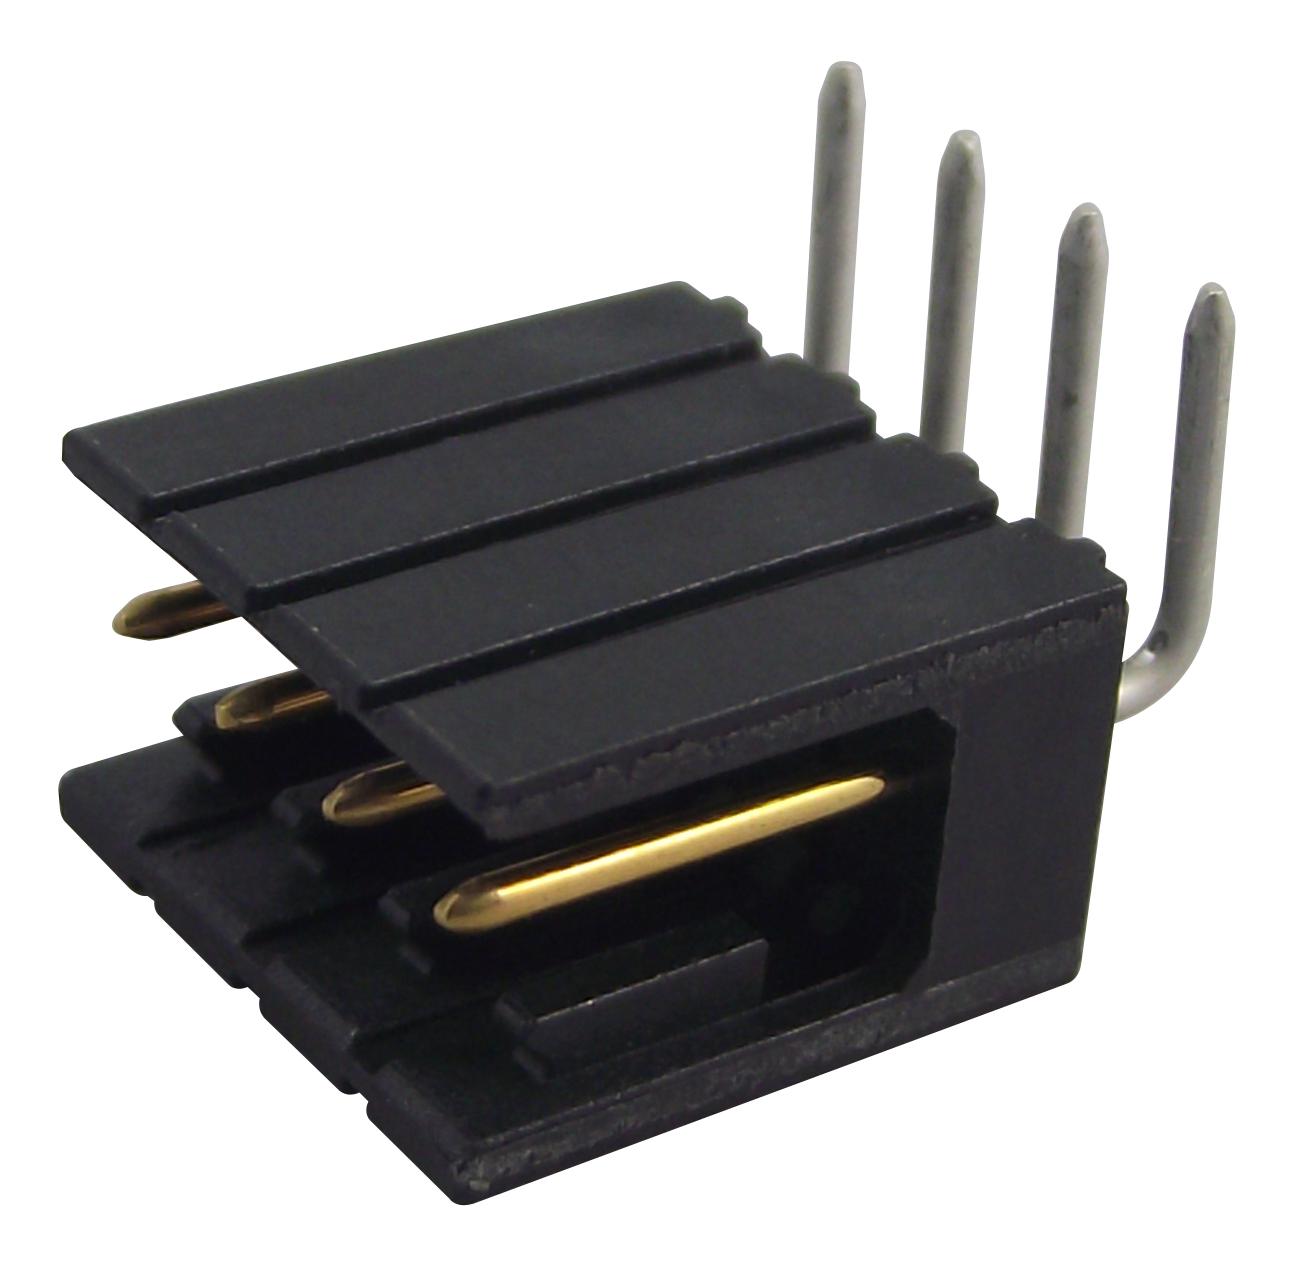 826468-4 HEADER, RIGHT ANGLE, 4WAY AMP - TE CONNECTIVITY